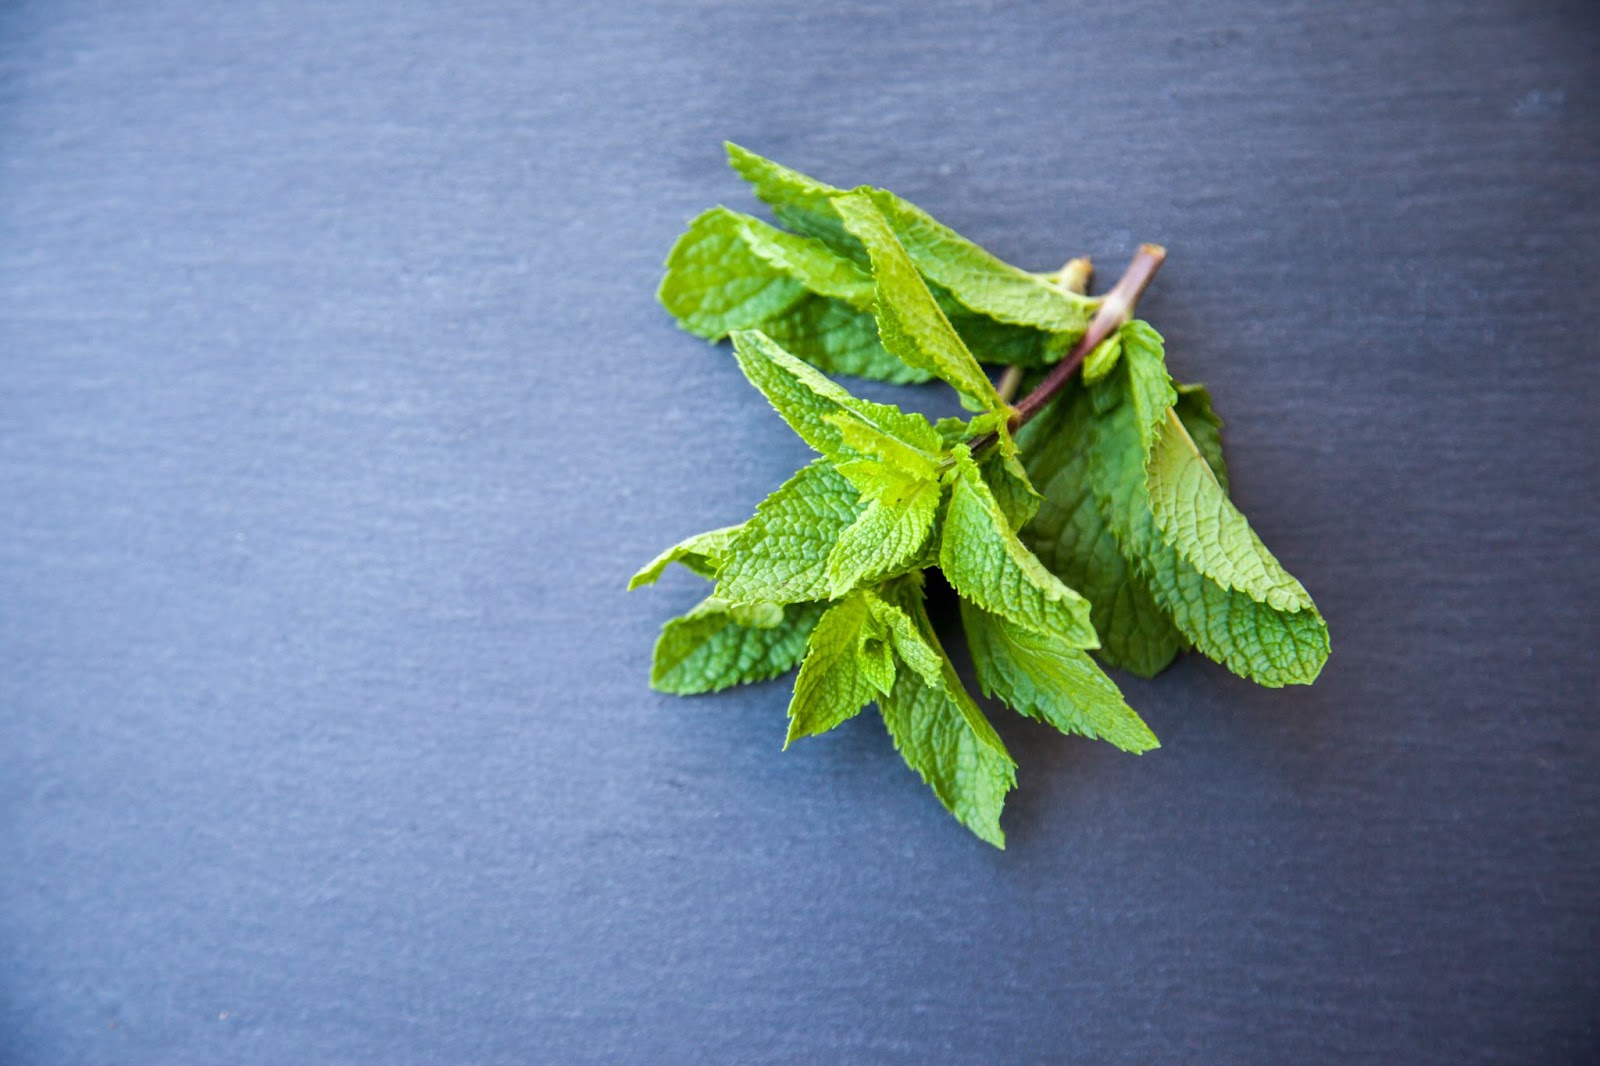 Sprig of peppermint leaves for lung health on a blue table.